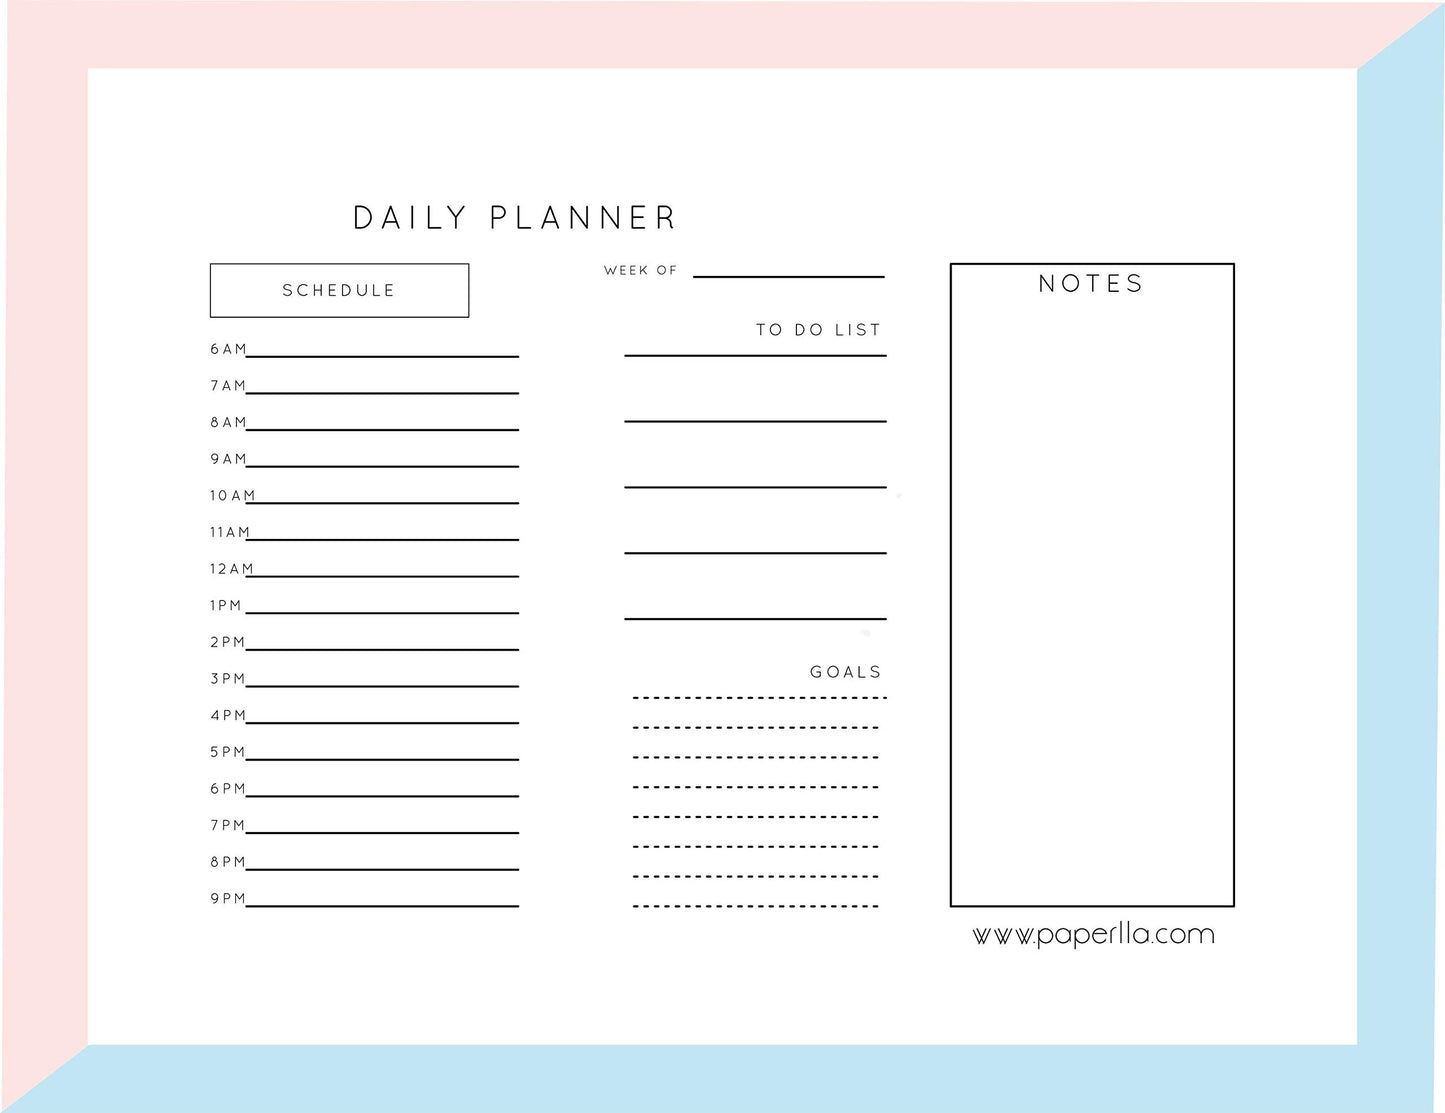 Daily Planner A4 Notepad/Elegant Writing Pad Goal Schedule to Do List Notes Diary Work Home Office Going Men and Women